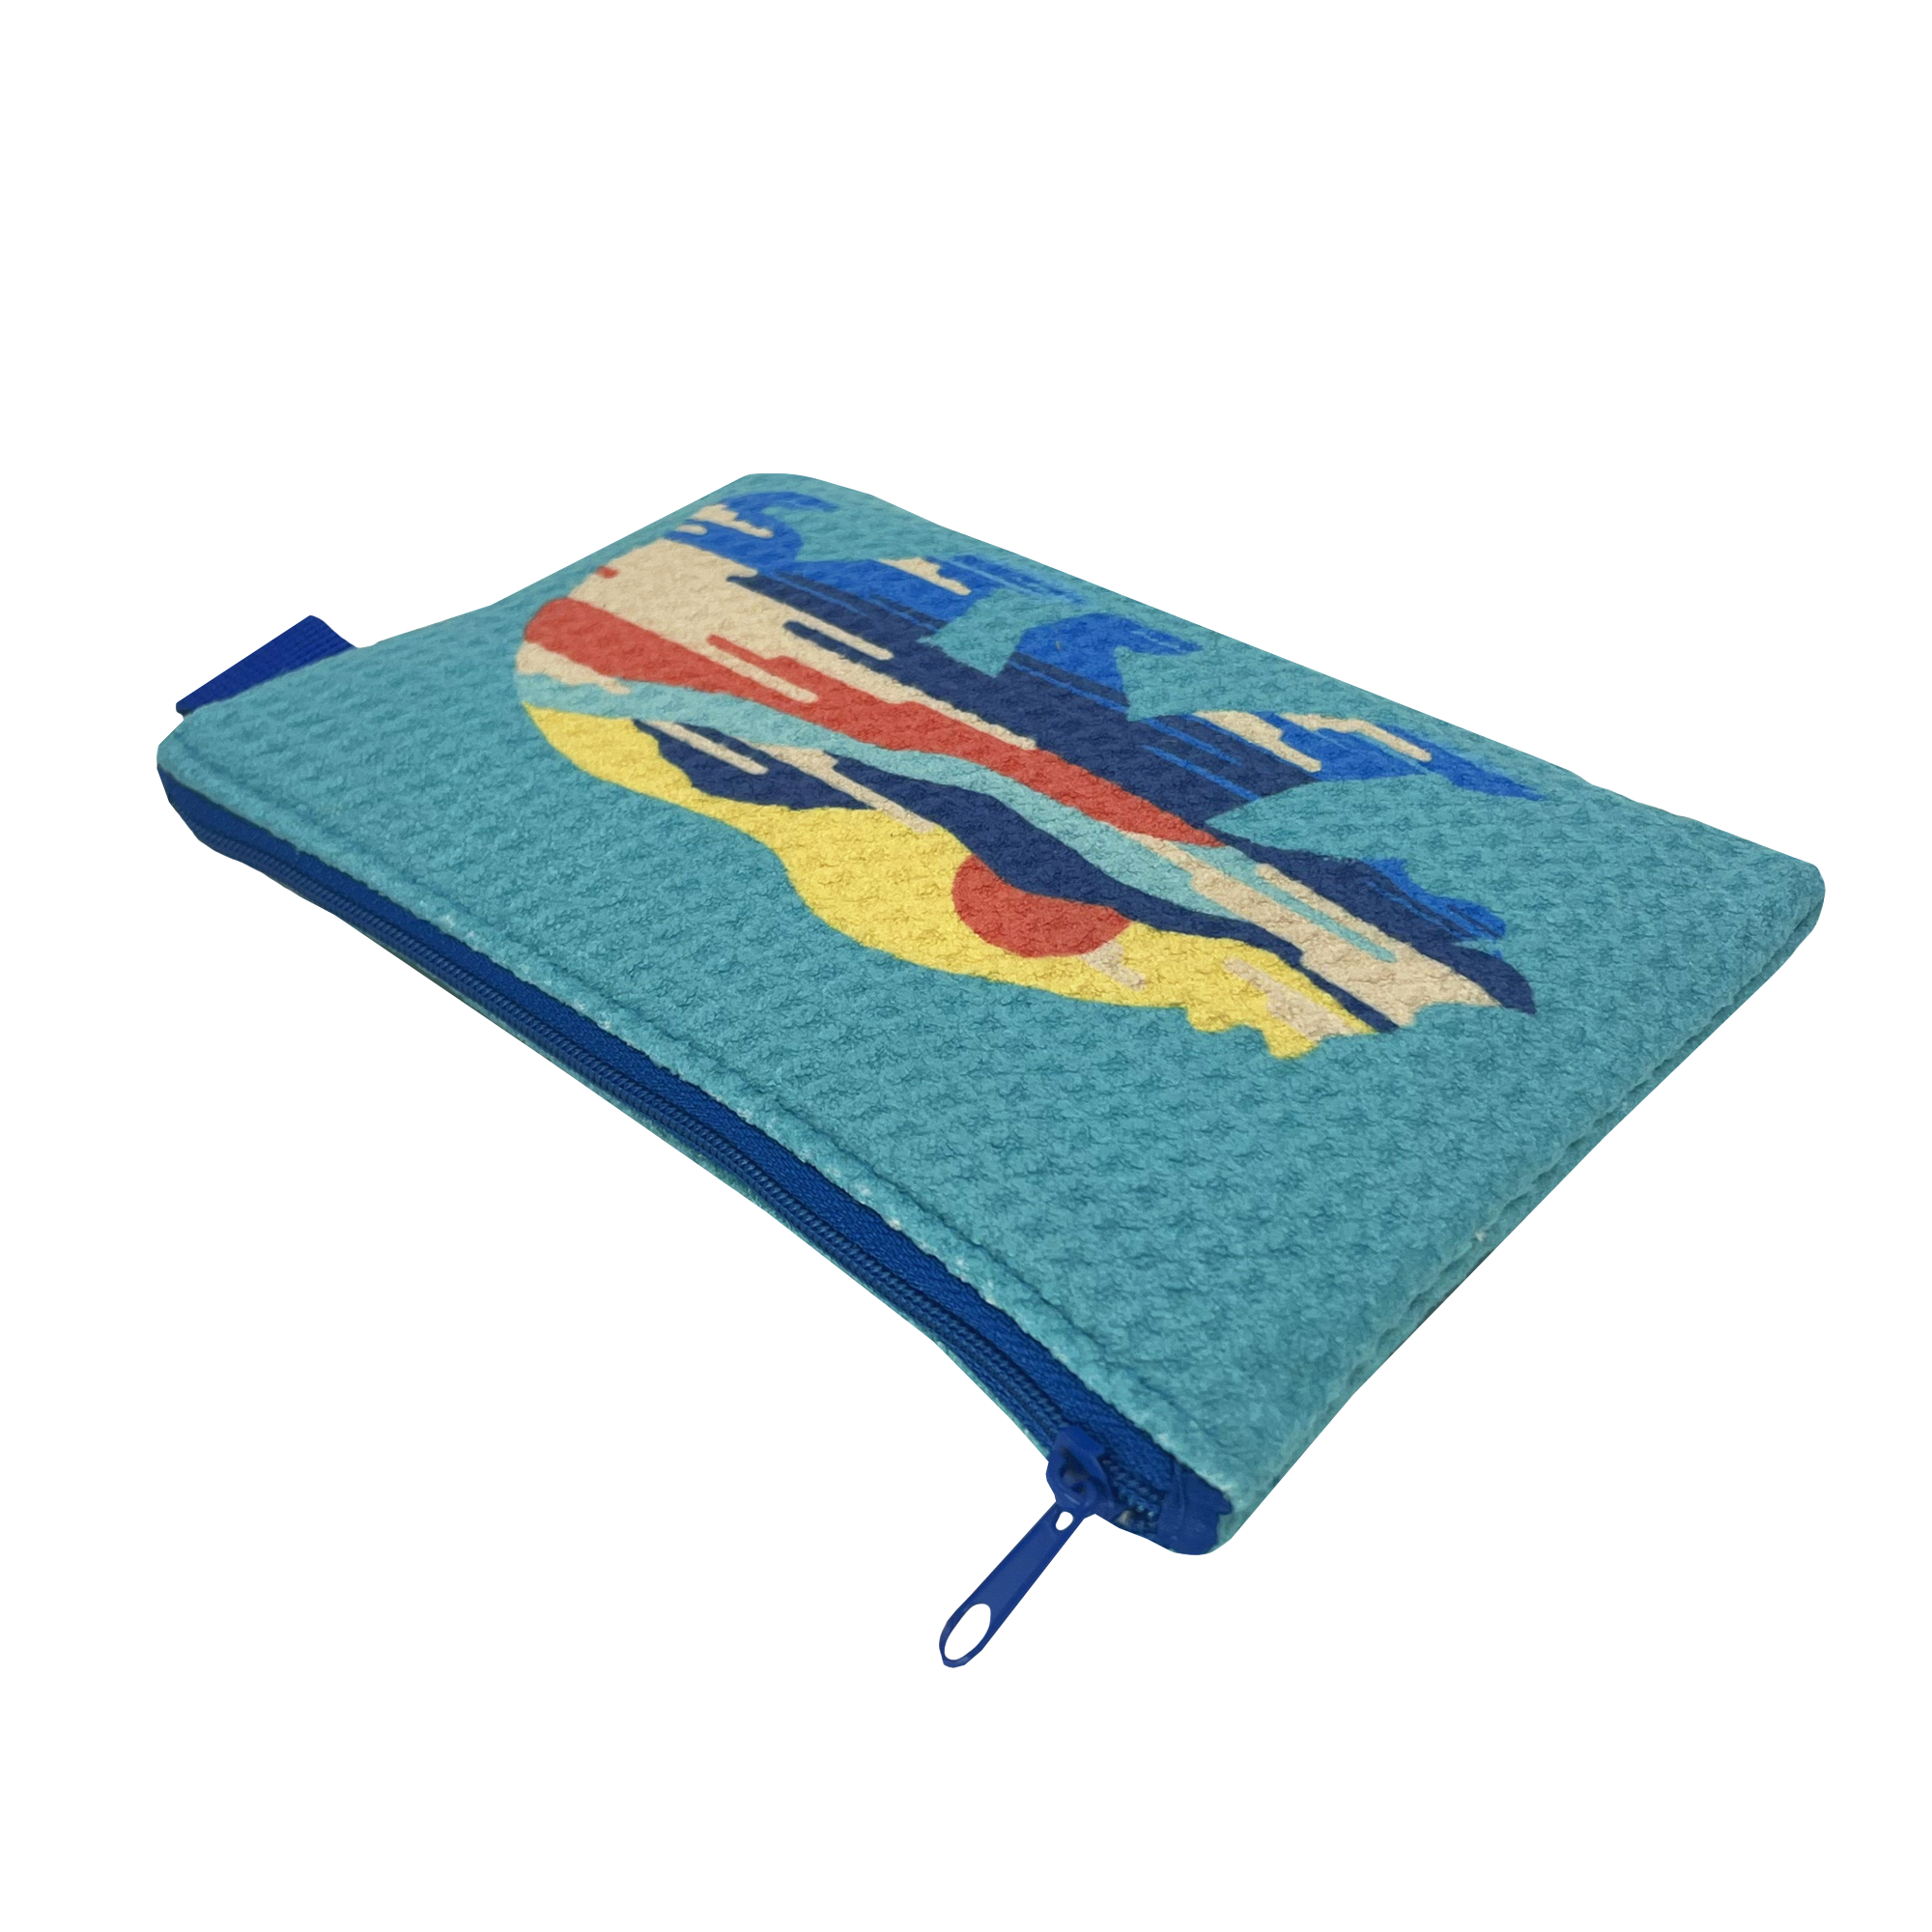 Above and side angle view of a blue zippered waffle weave pouch with a full-color sunset-themed graphic of a bear on the front.